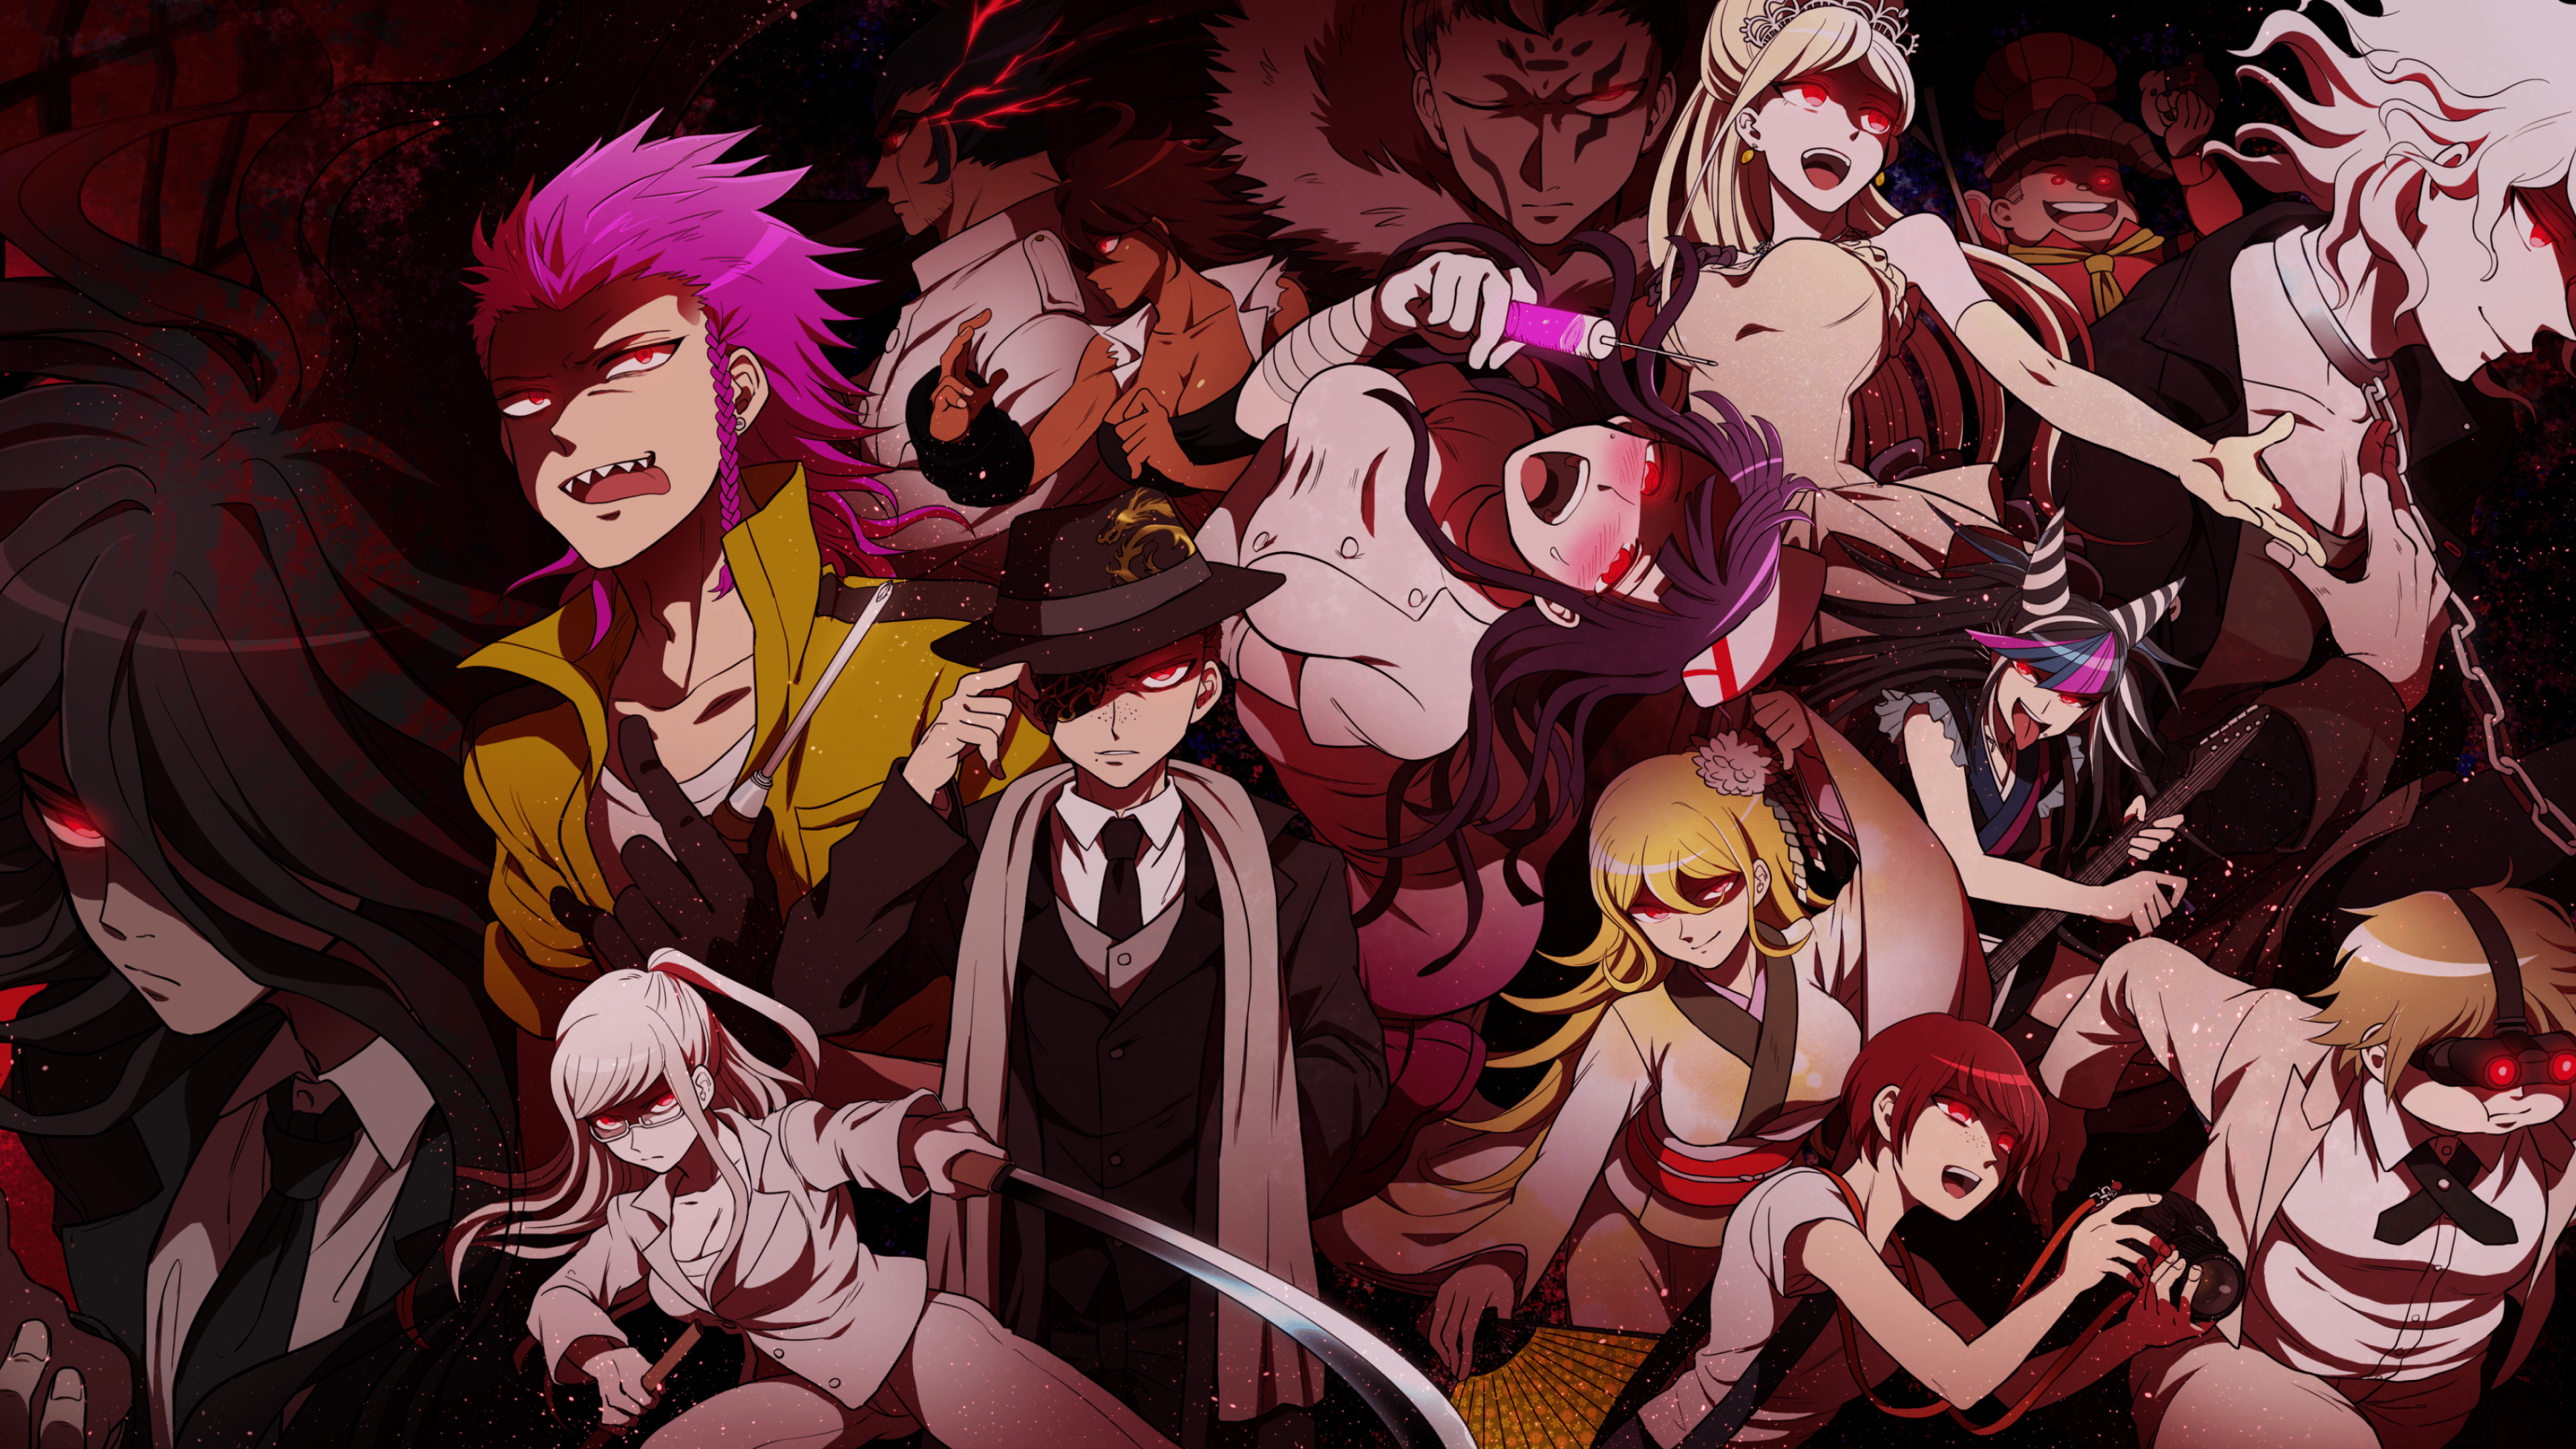 Danganronpa School Uniform HD Games 4k Wallpapers Images Backgrounds  Photos and Pictures